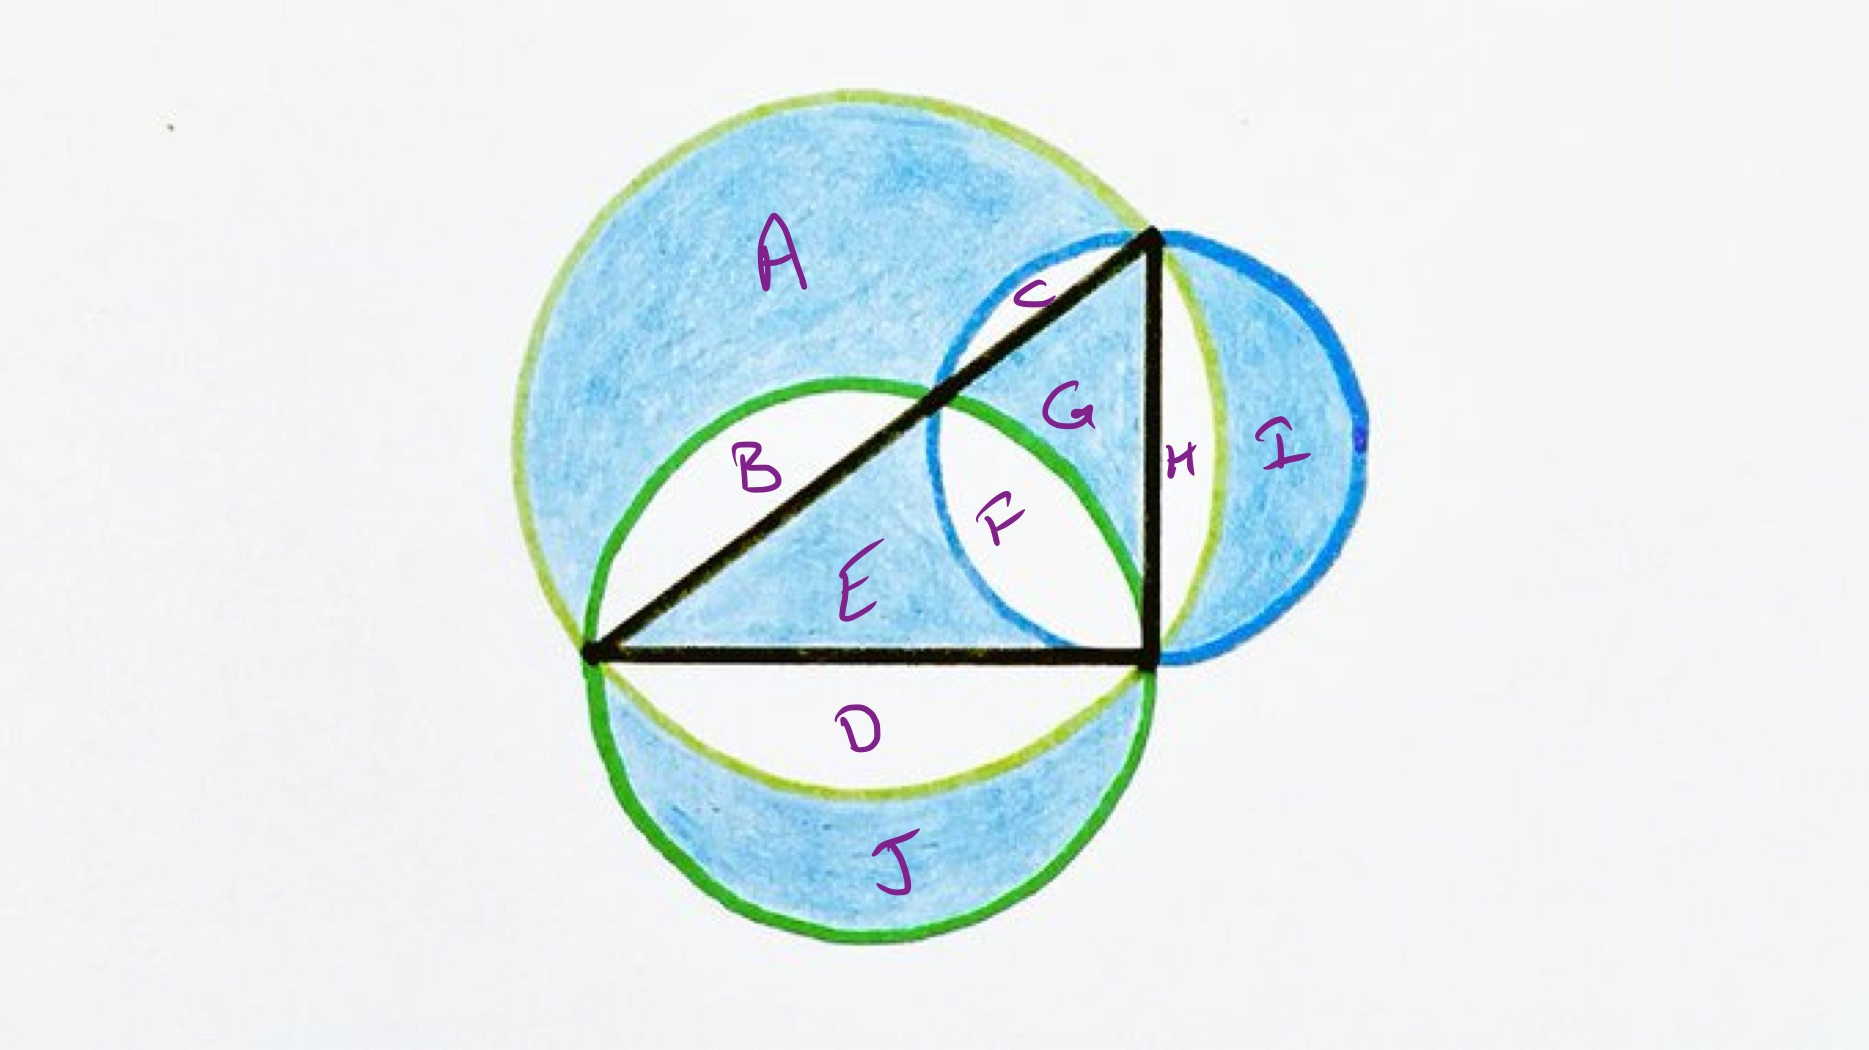 Circles around a triangle labelled